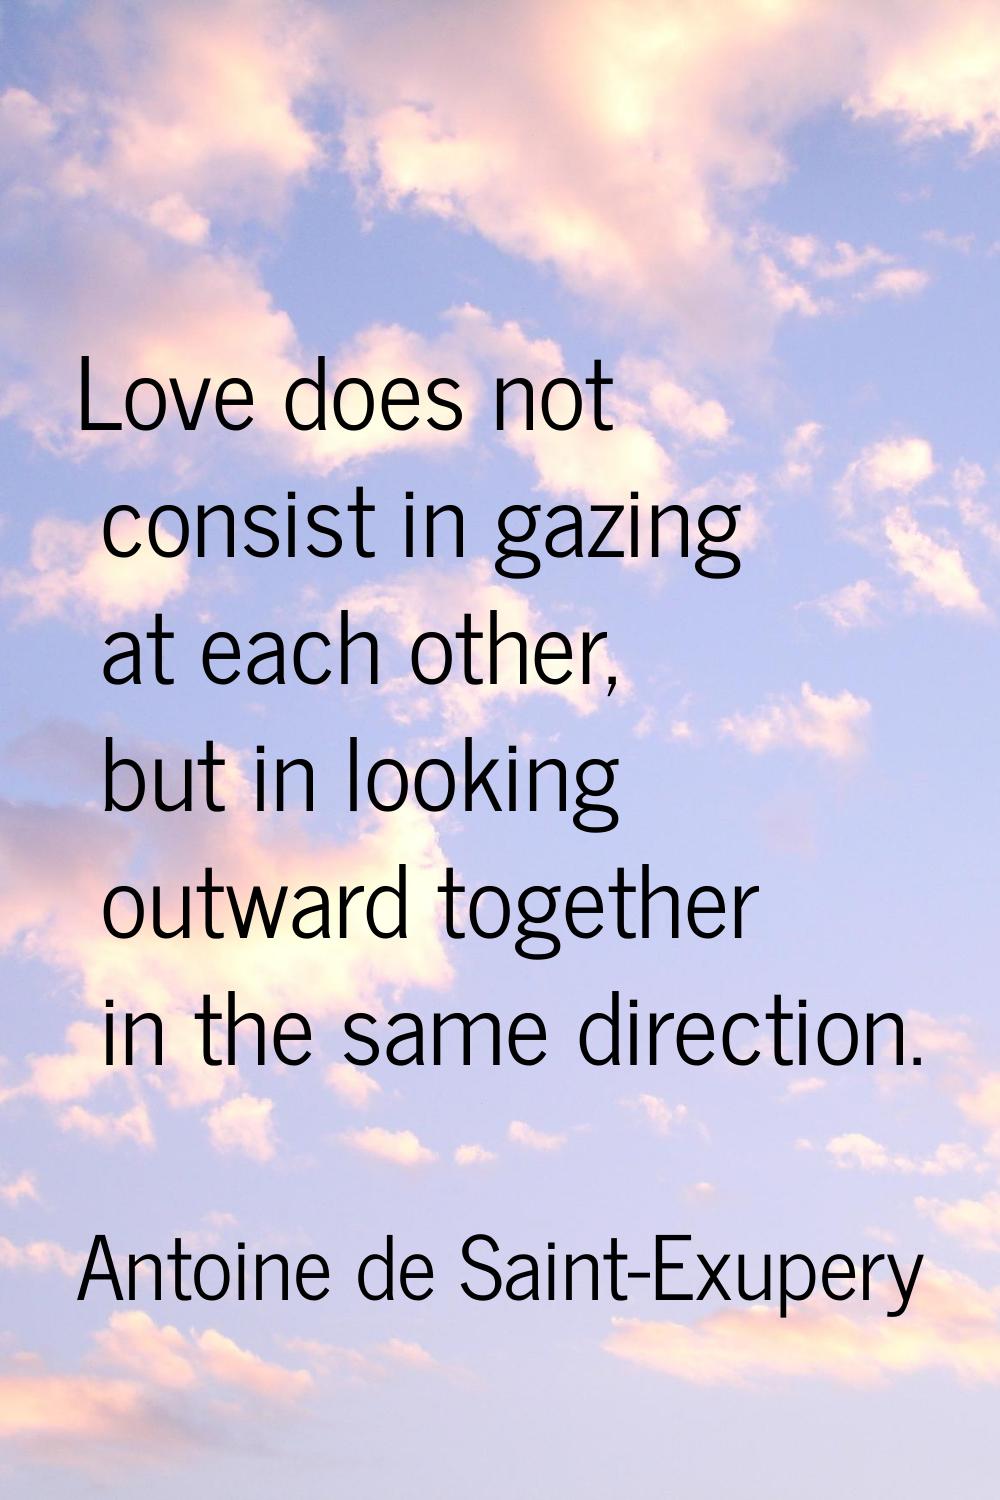 Love does not consist in gazing at each other, but in looking outward together in the same directio